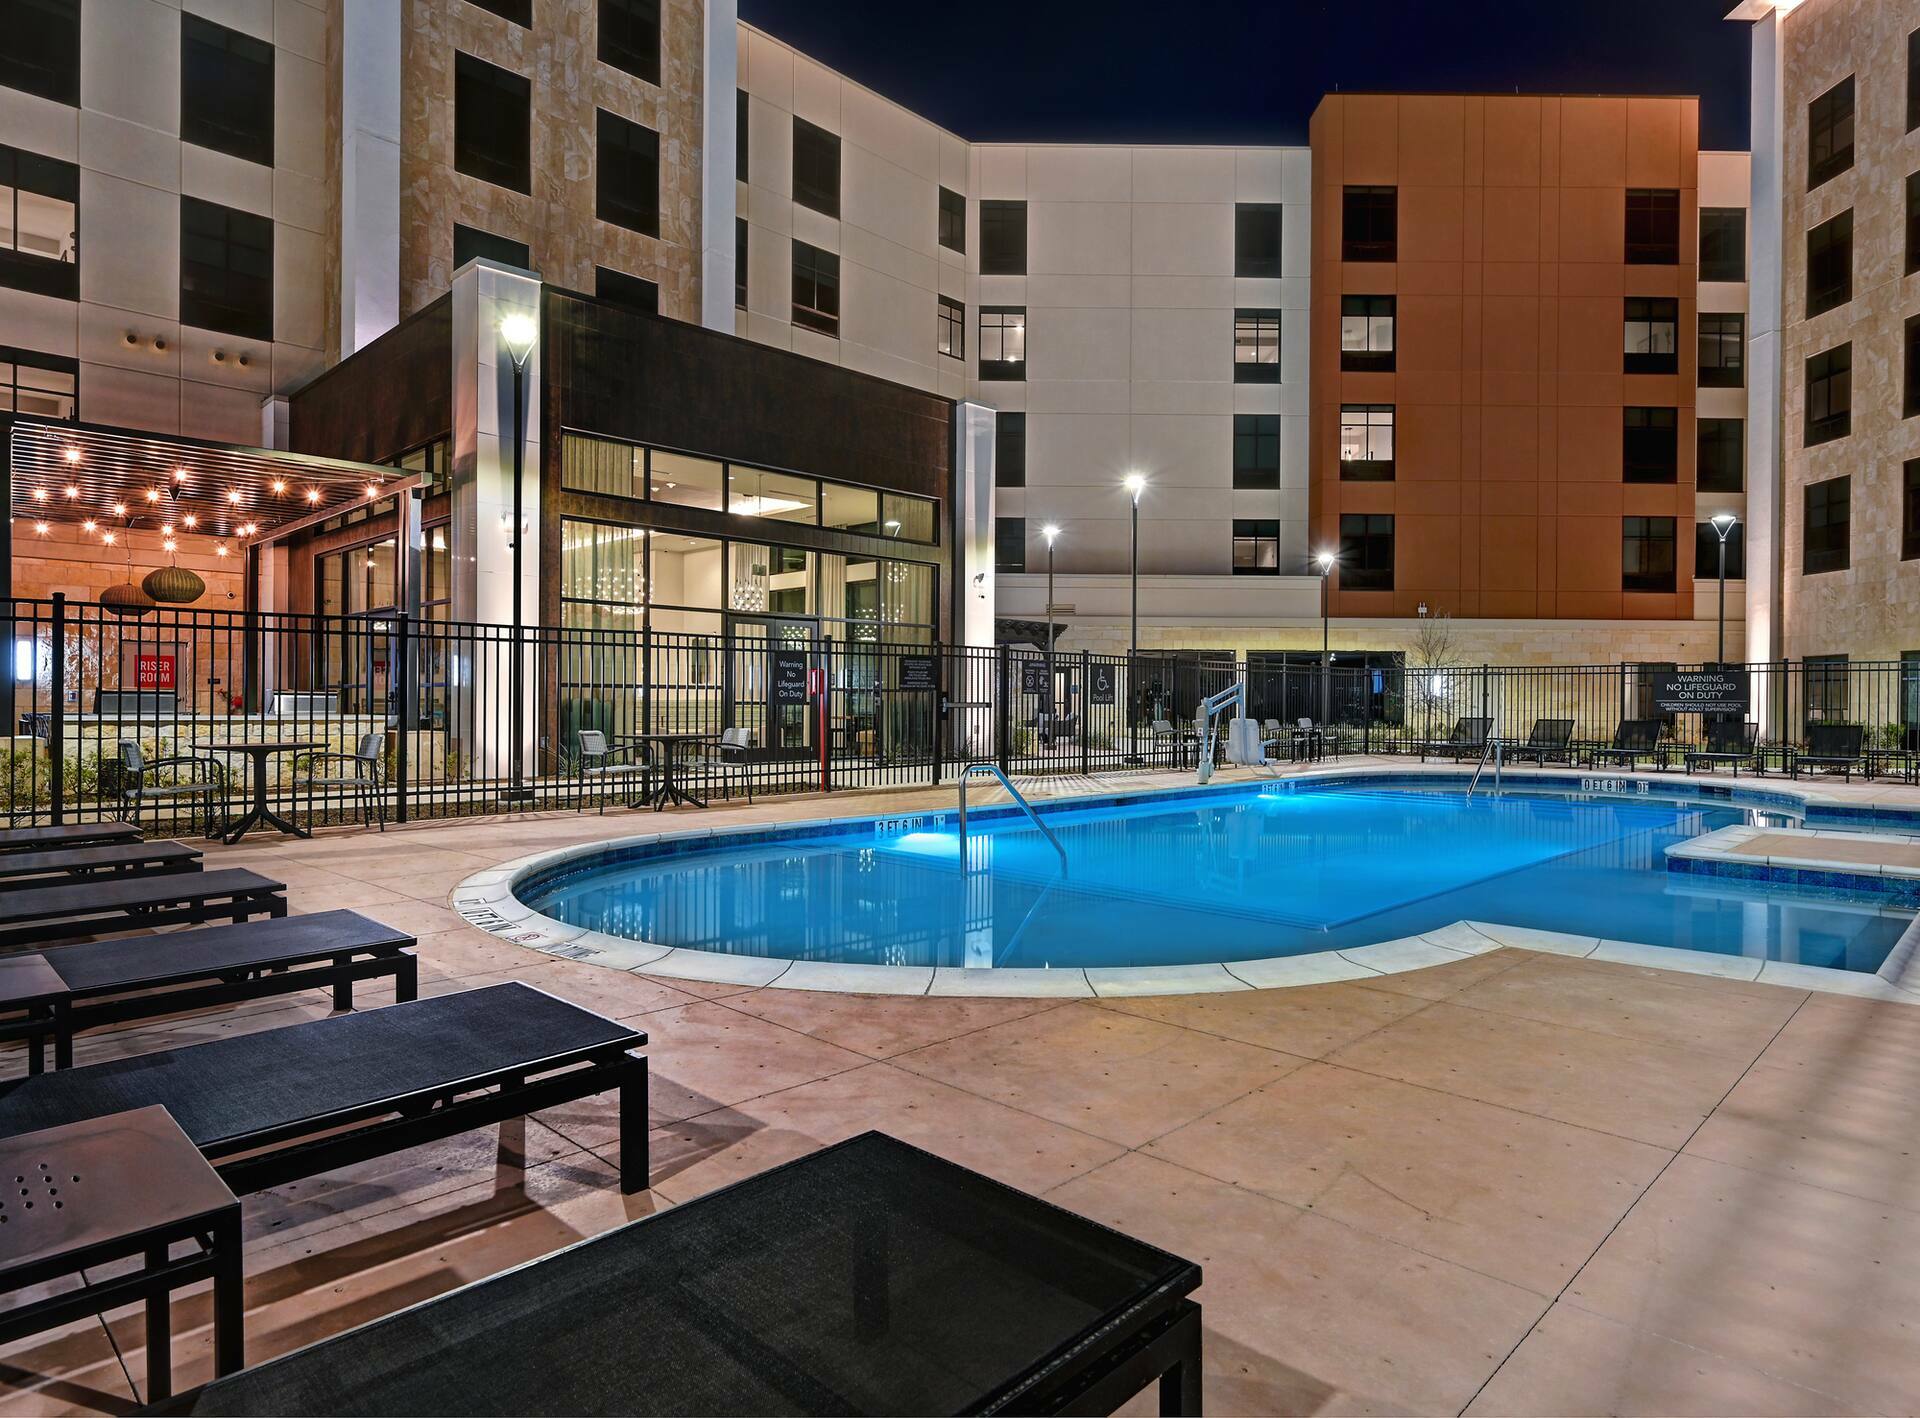 Photo of Homewood Suites by Hilton Dallas The Colony, The Colony, TX